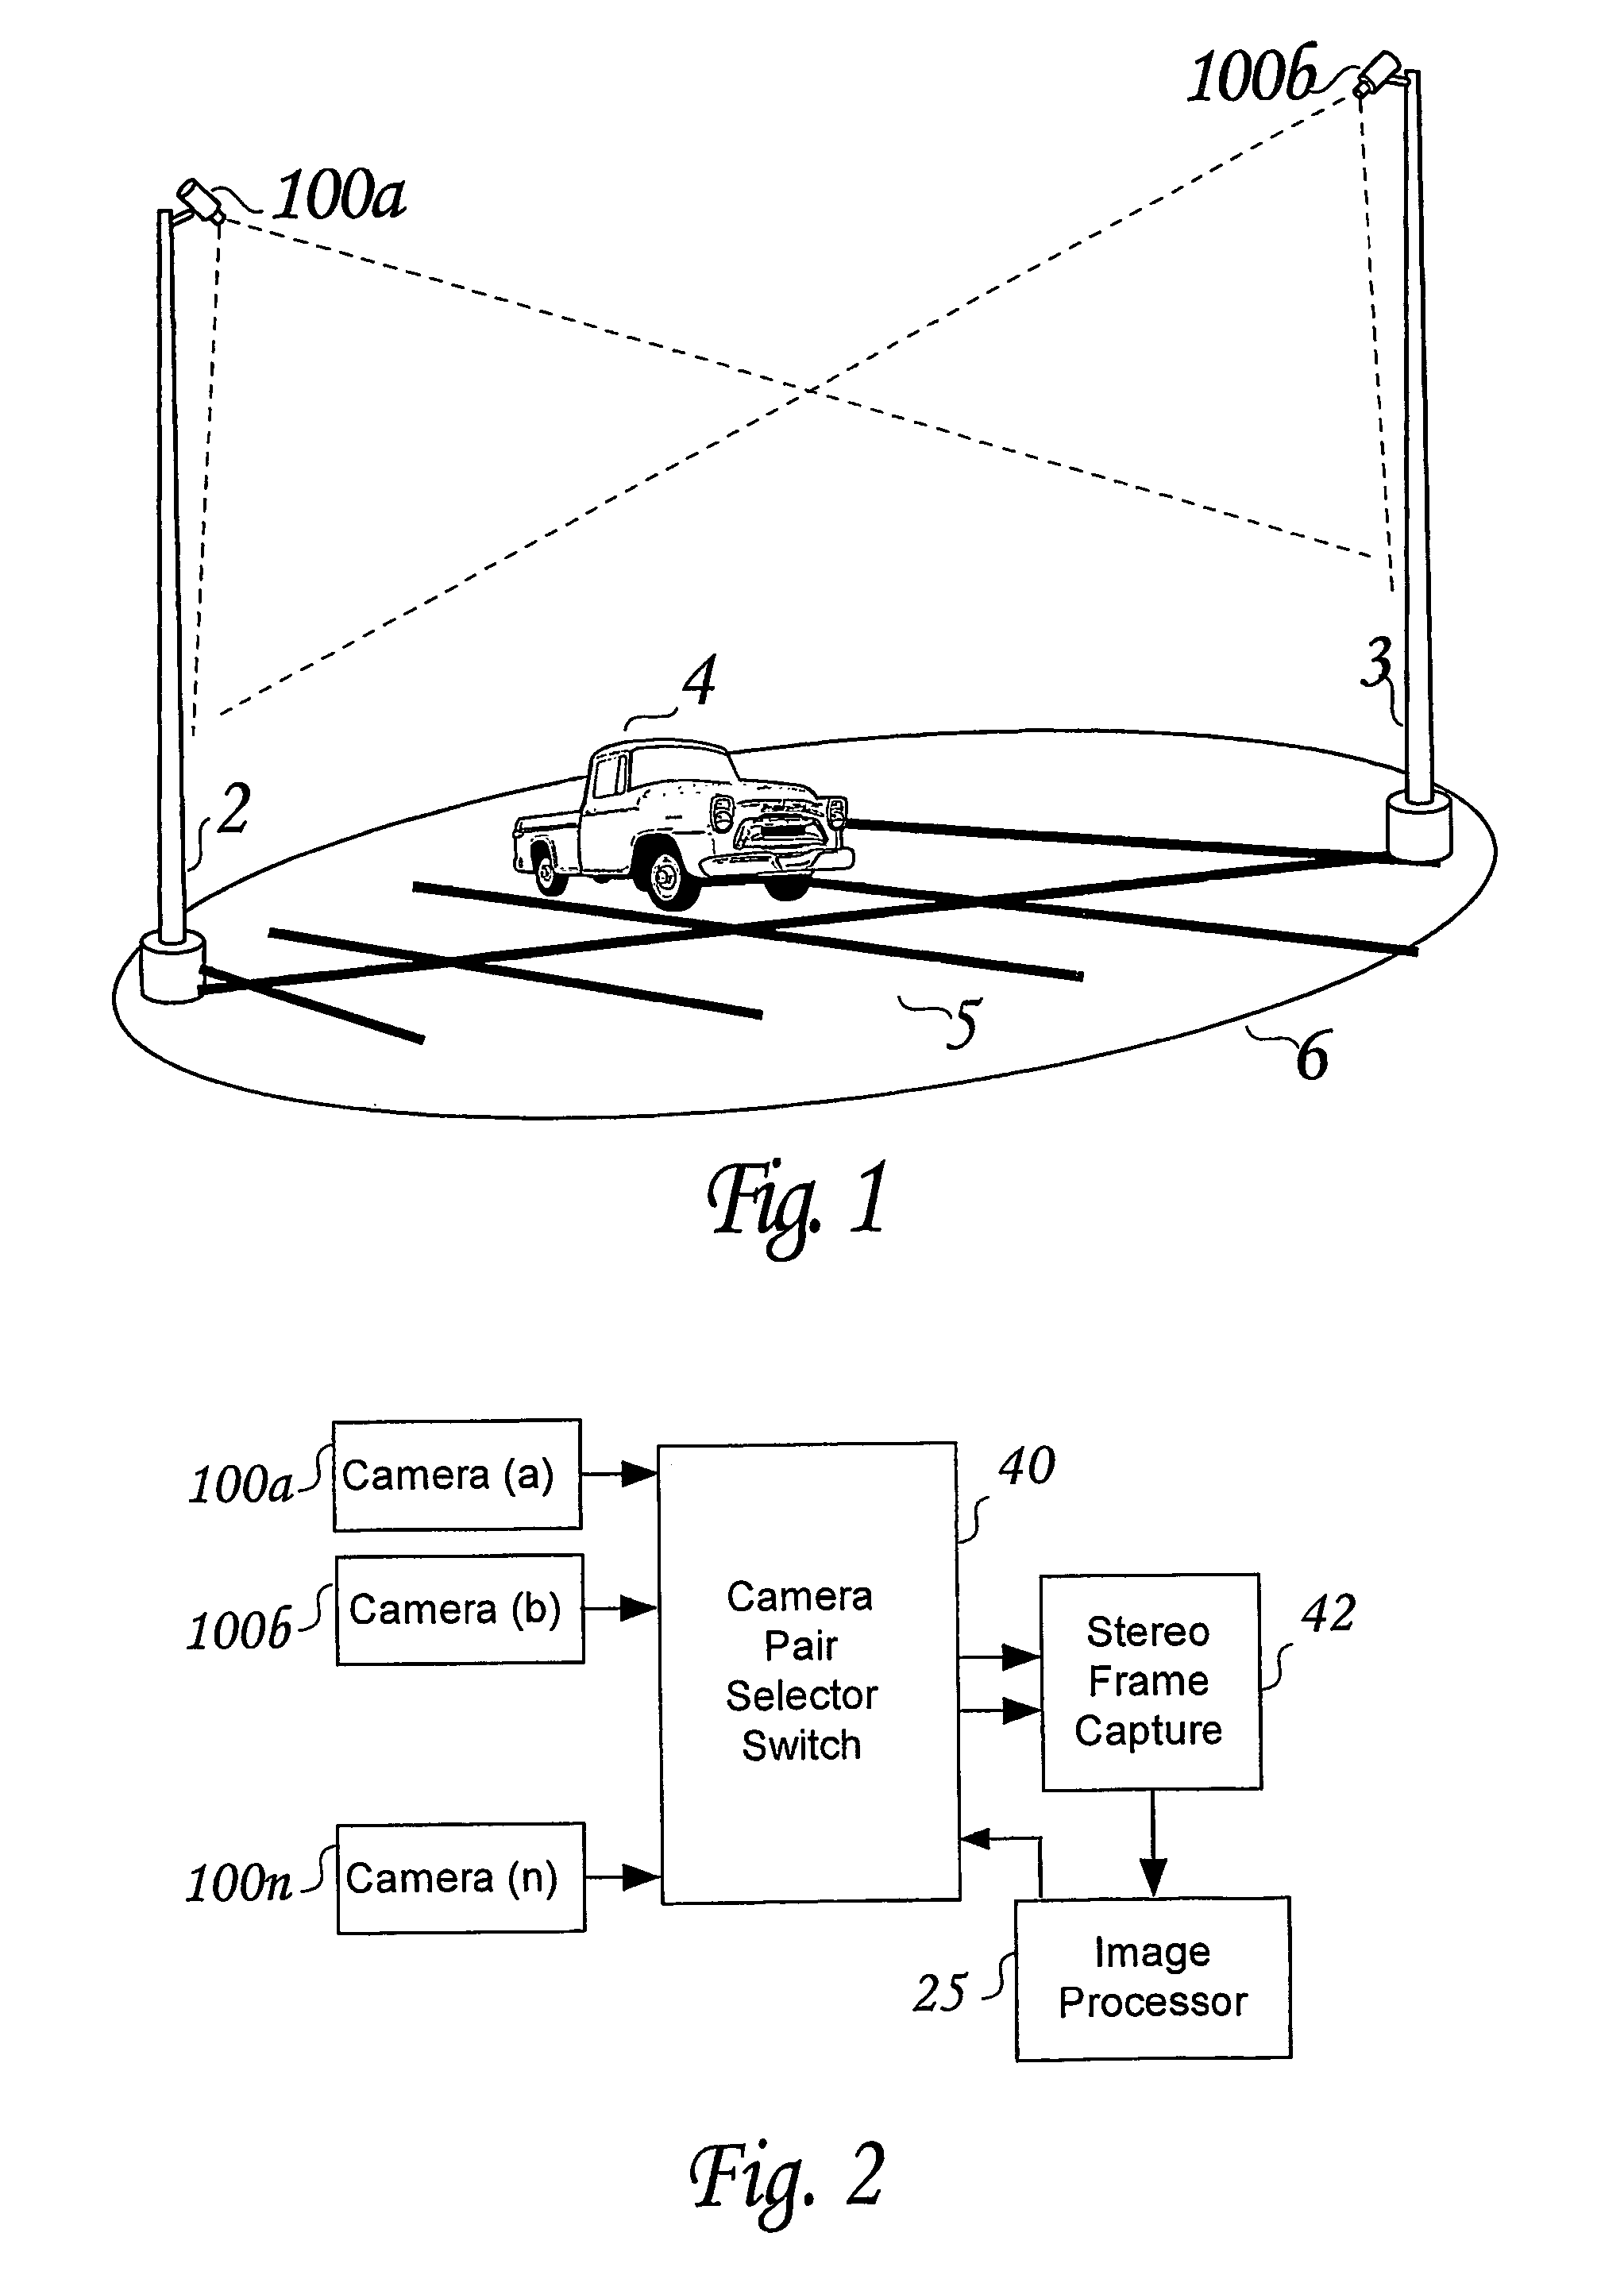 Apparatus and method for sensing the occupancy status of parking spaces in a parking lot